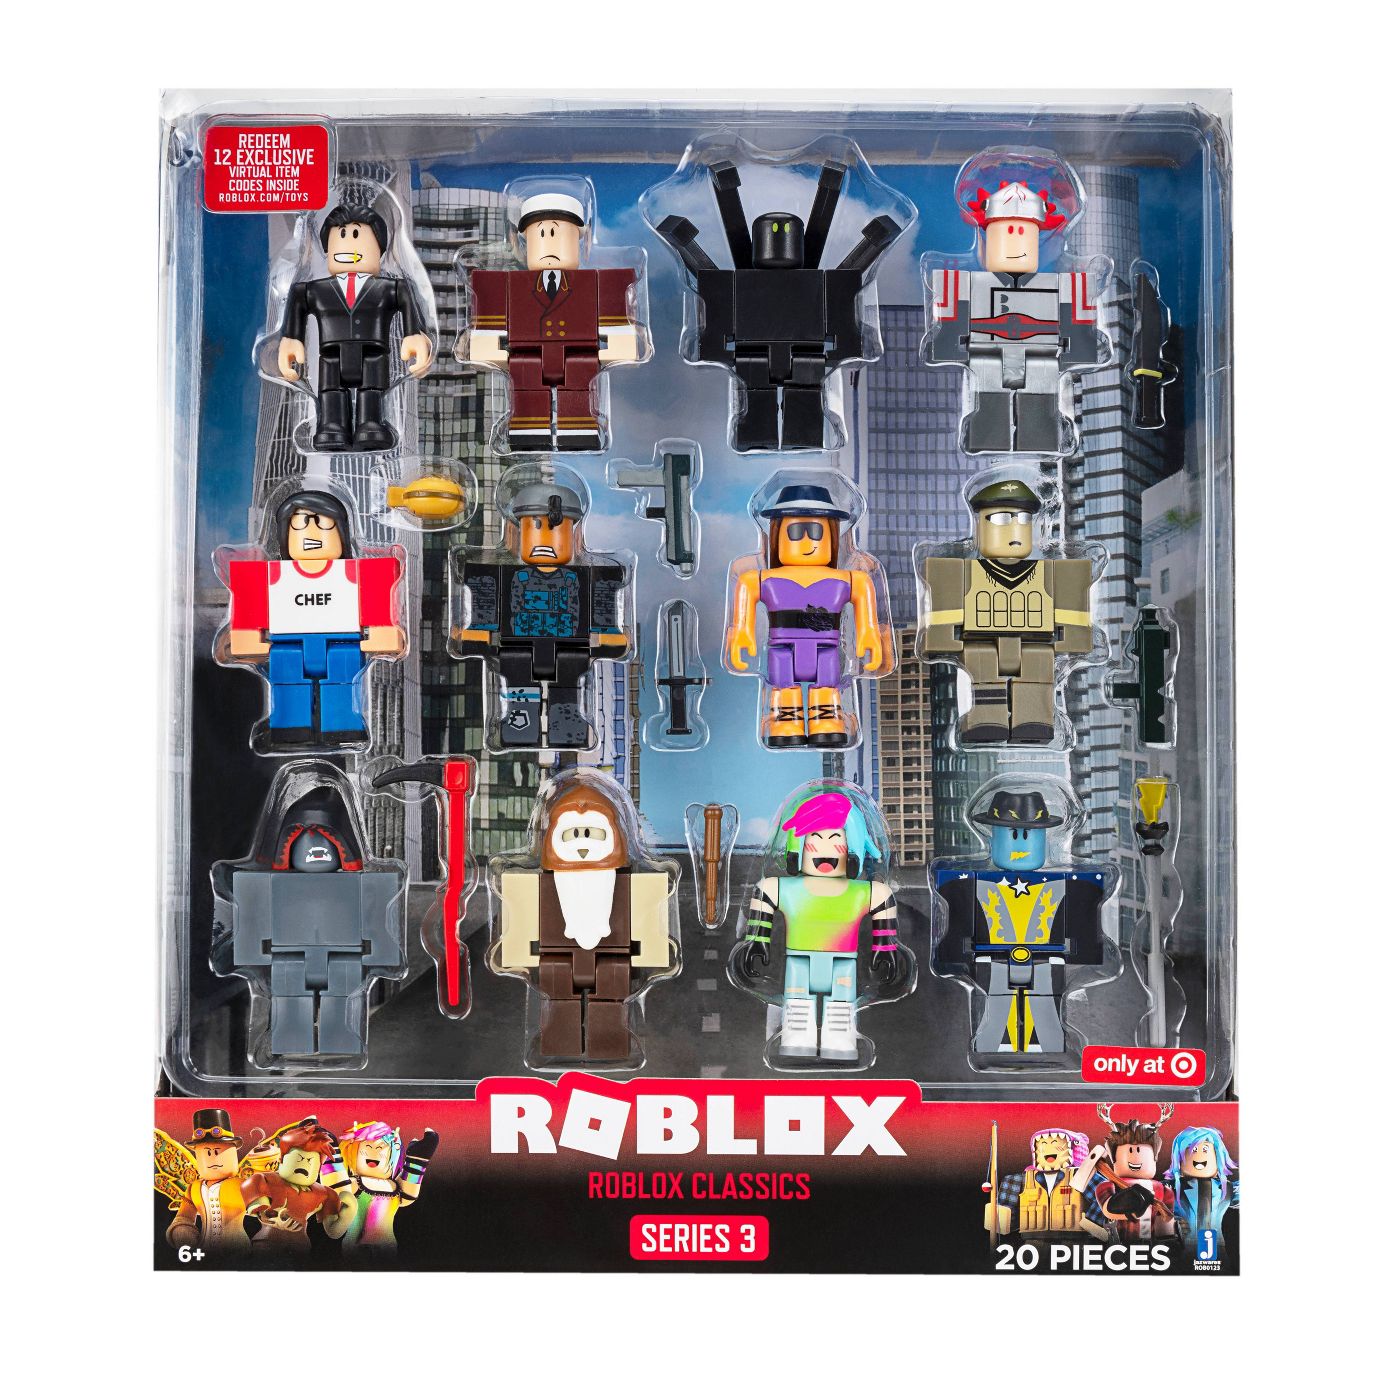 Roblox 12 Mystery Figures Series 3 New Toys Bundle Limited Set Lot 22pc No Codes Action Figures Tv Movie Video Games - all roblox toy codes series 3